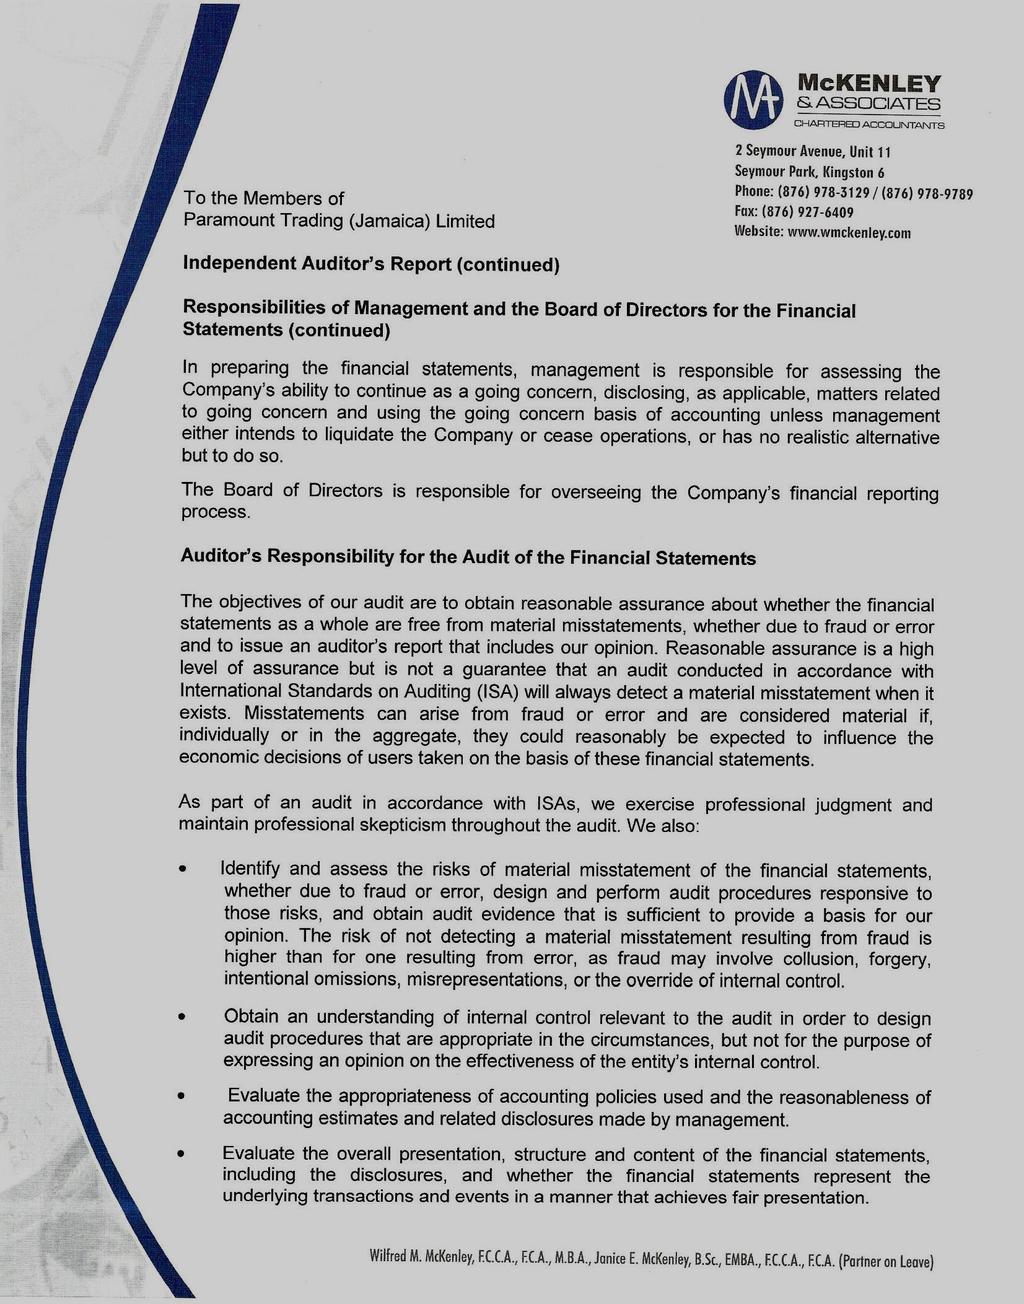 To the Members of Paramount Trading (Jamaica) Limited Independent Auditor s Report (continued) Responsibilities of Management and the Board of Directors for the Financial Statements (continued) In